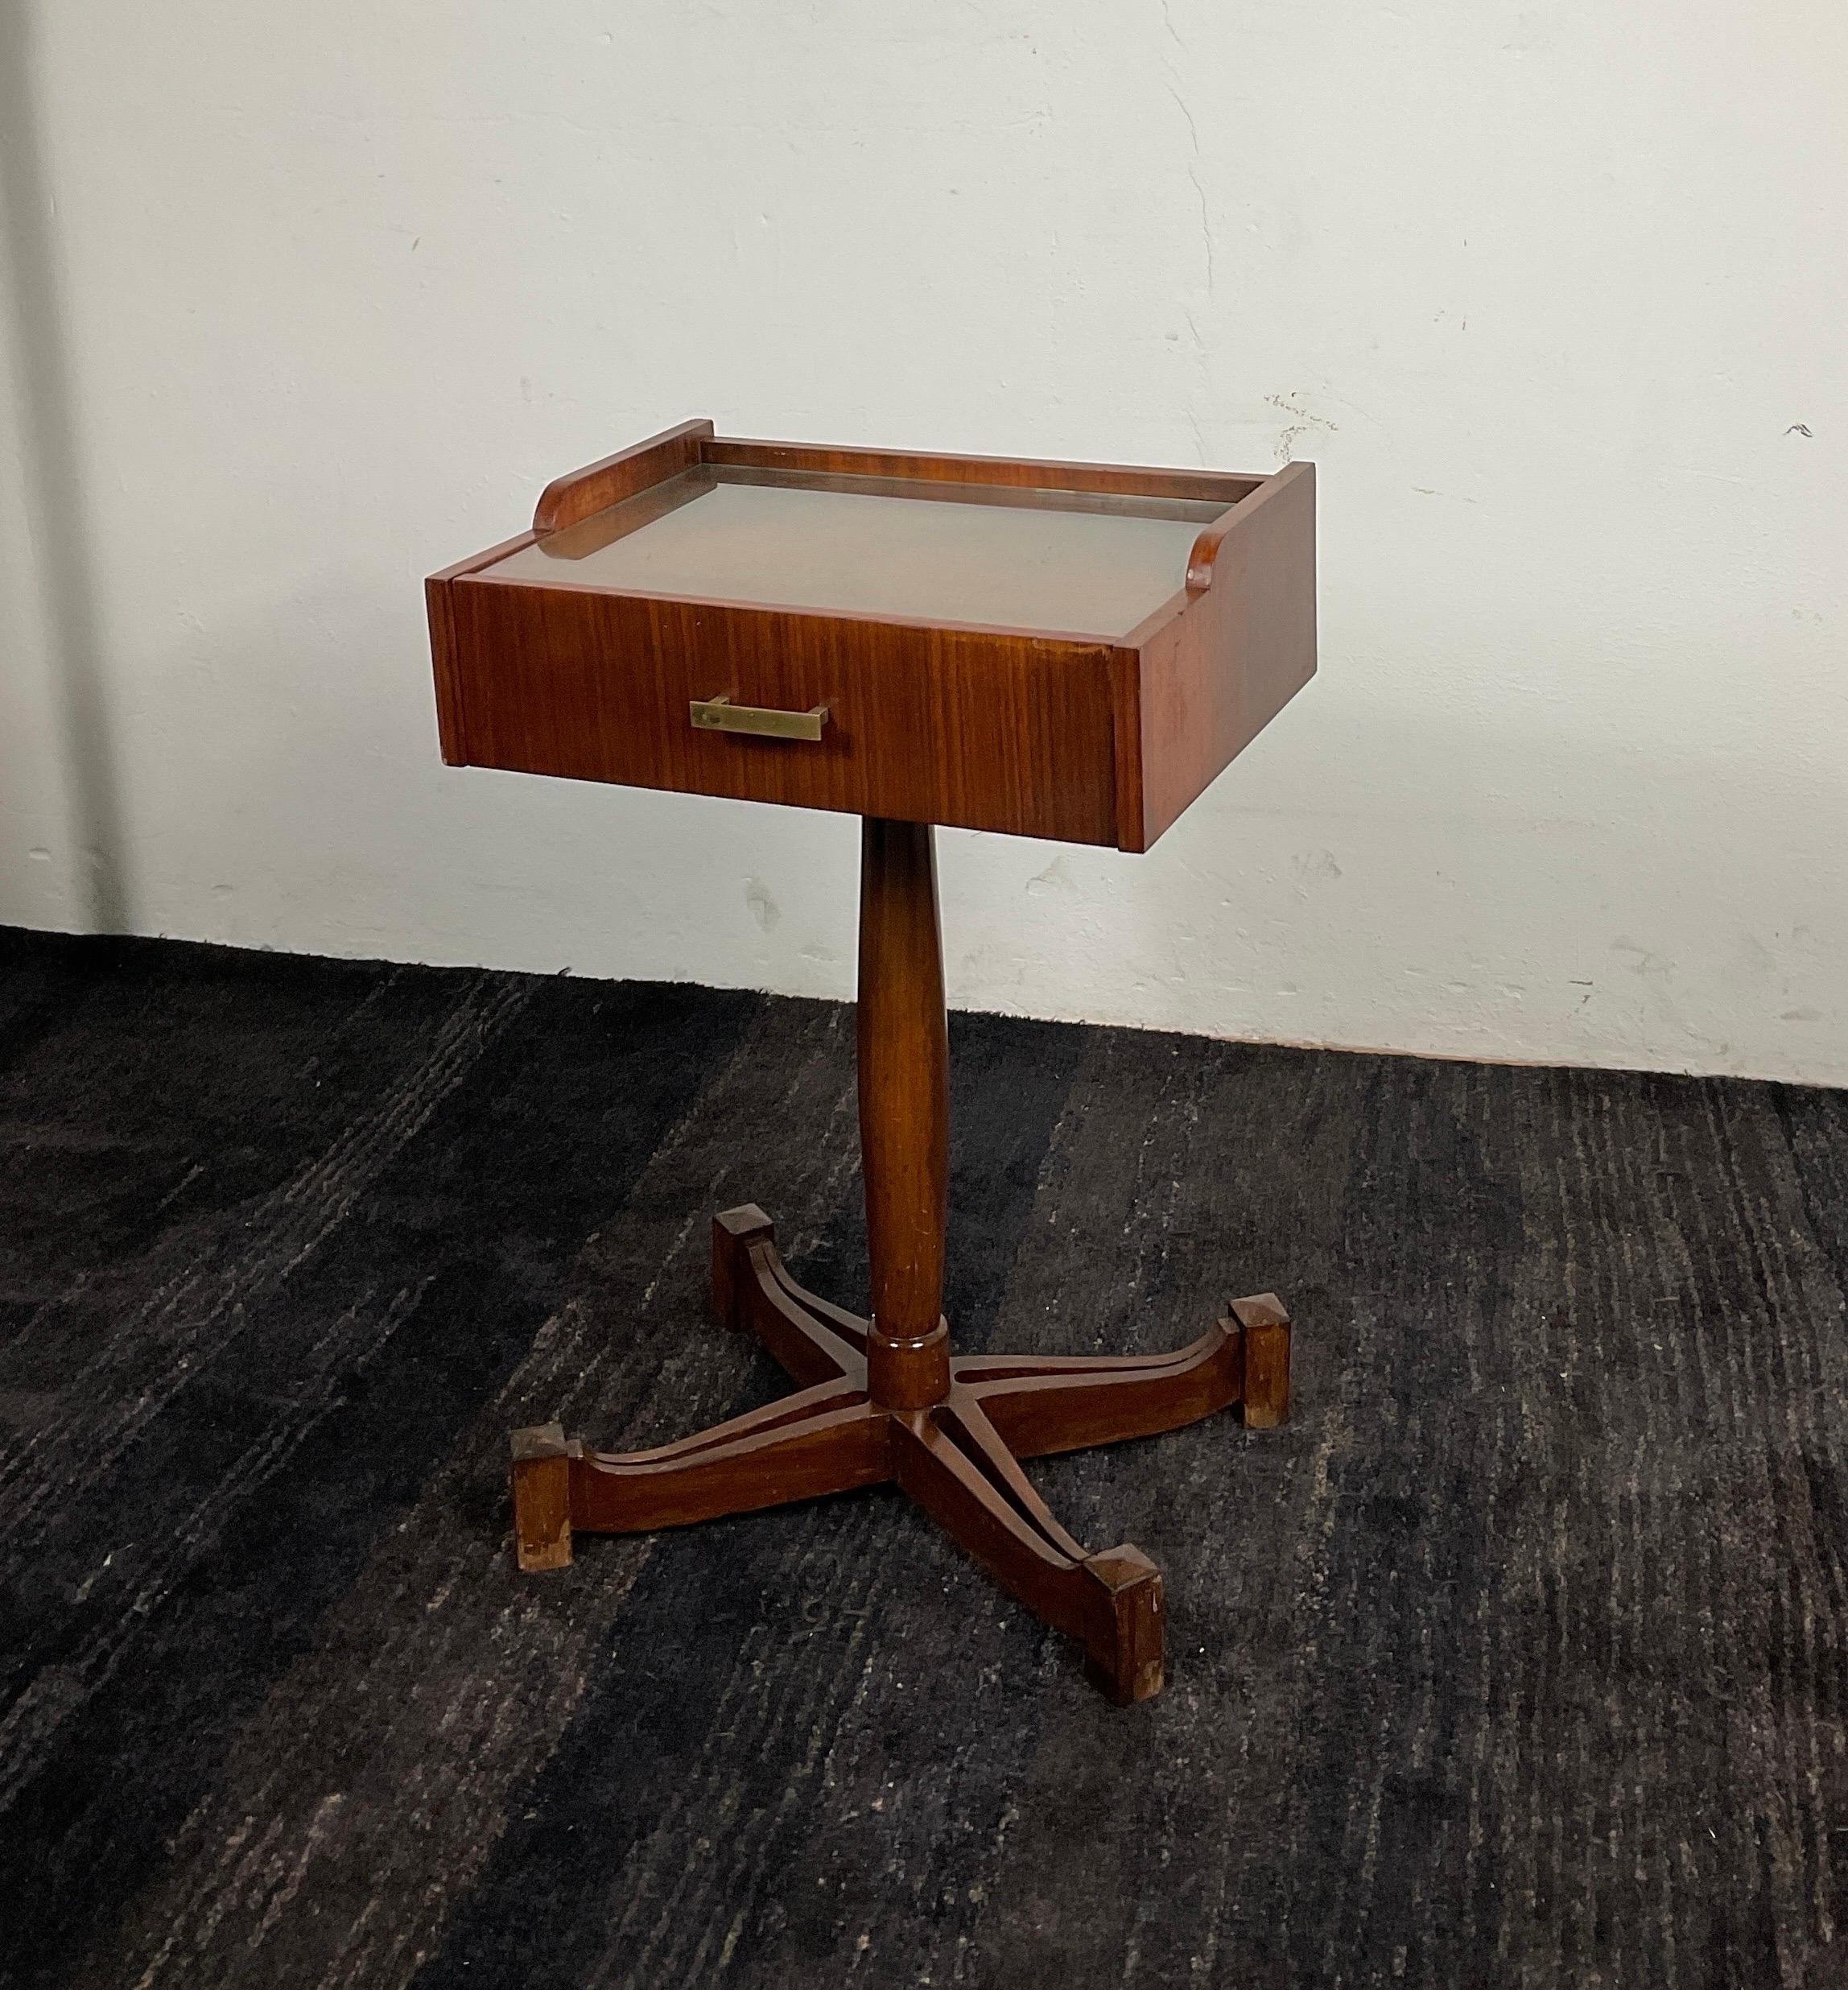 Wooden Nightstand Sc 50 Model by Carlo Salocchi for Sormani 60's, Italy In Good Condition For Sale In Catania, IT